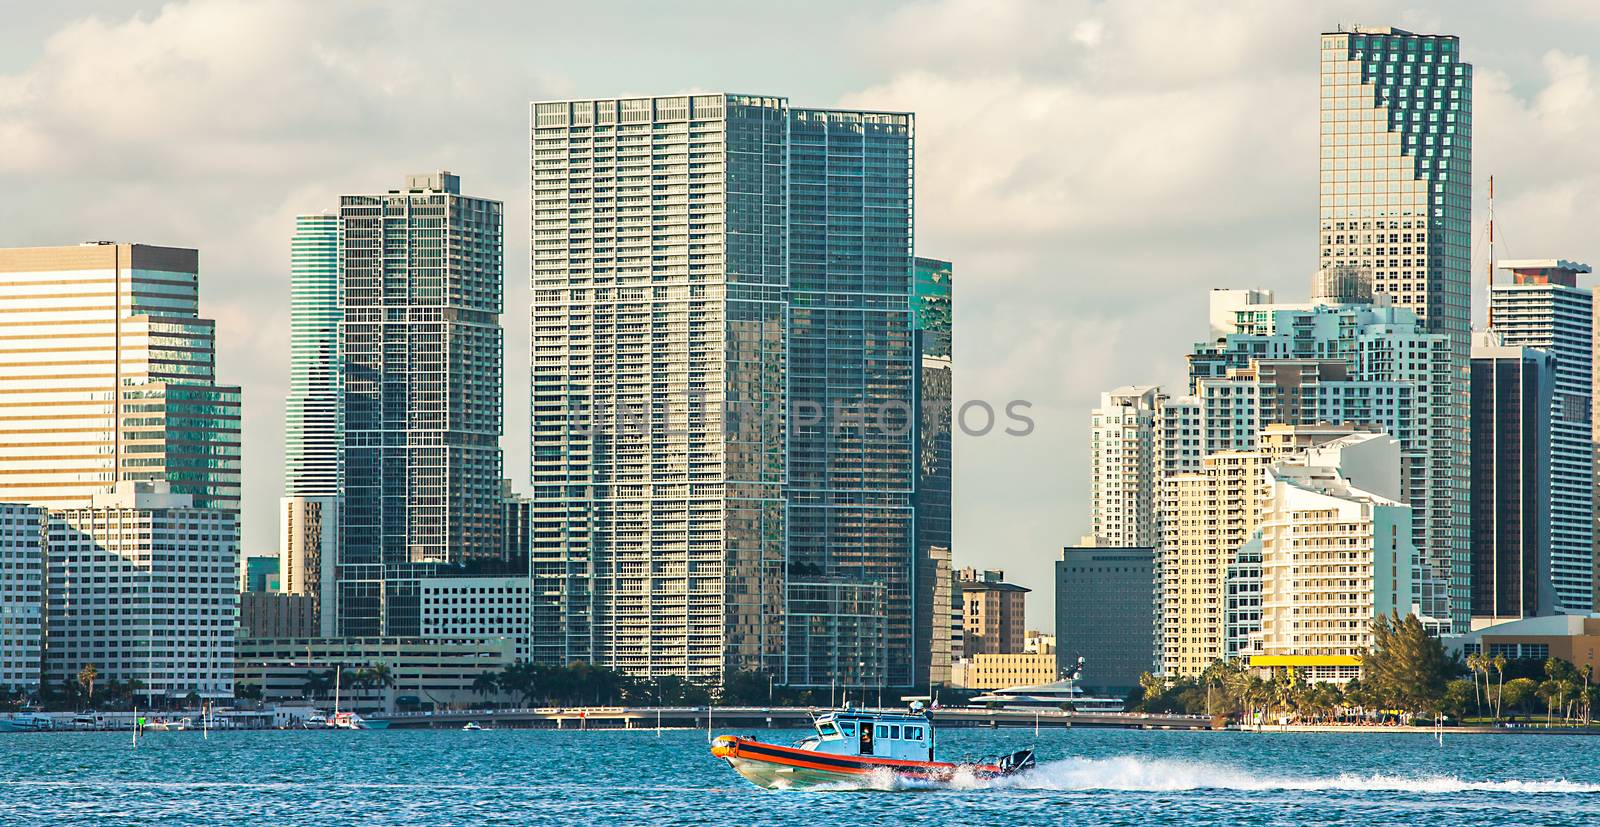 Boat of the Coast Guard in front of the skyline of Miami Florida by Makeral